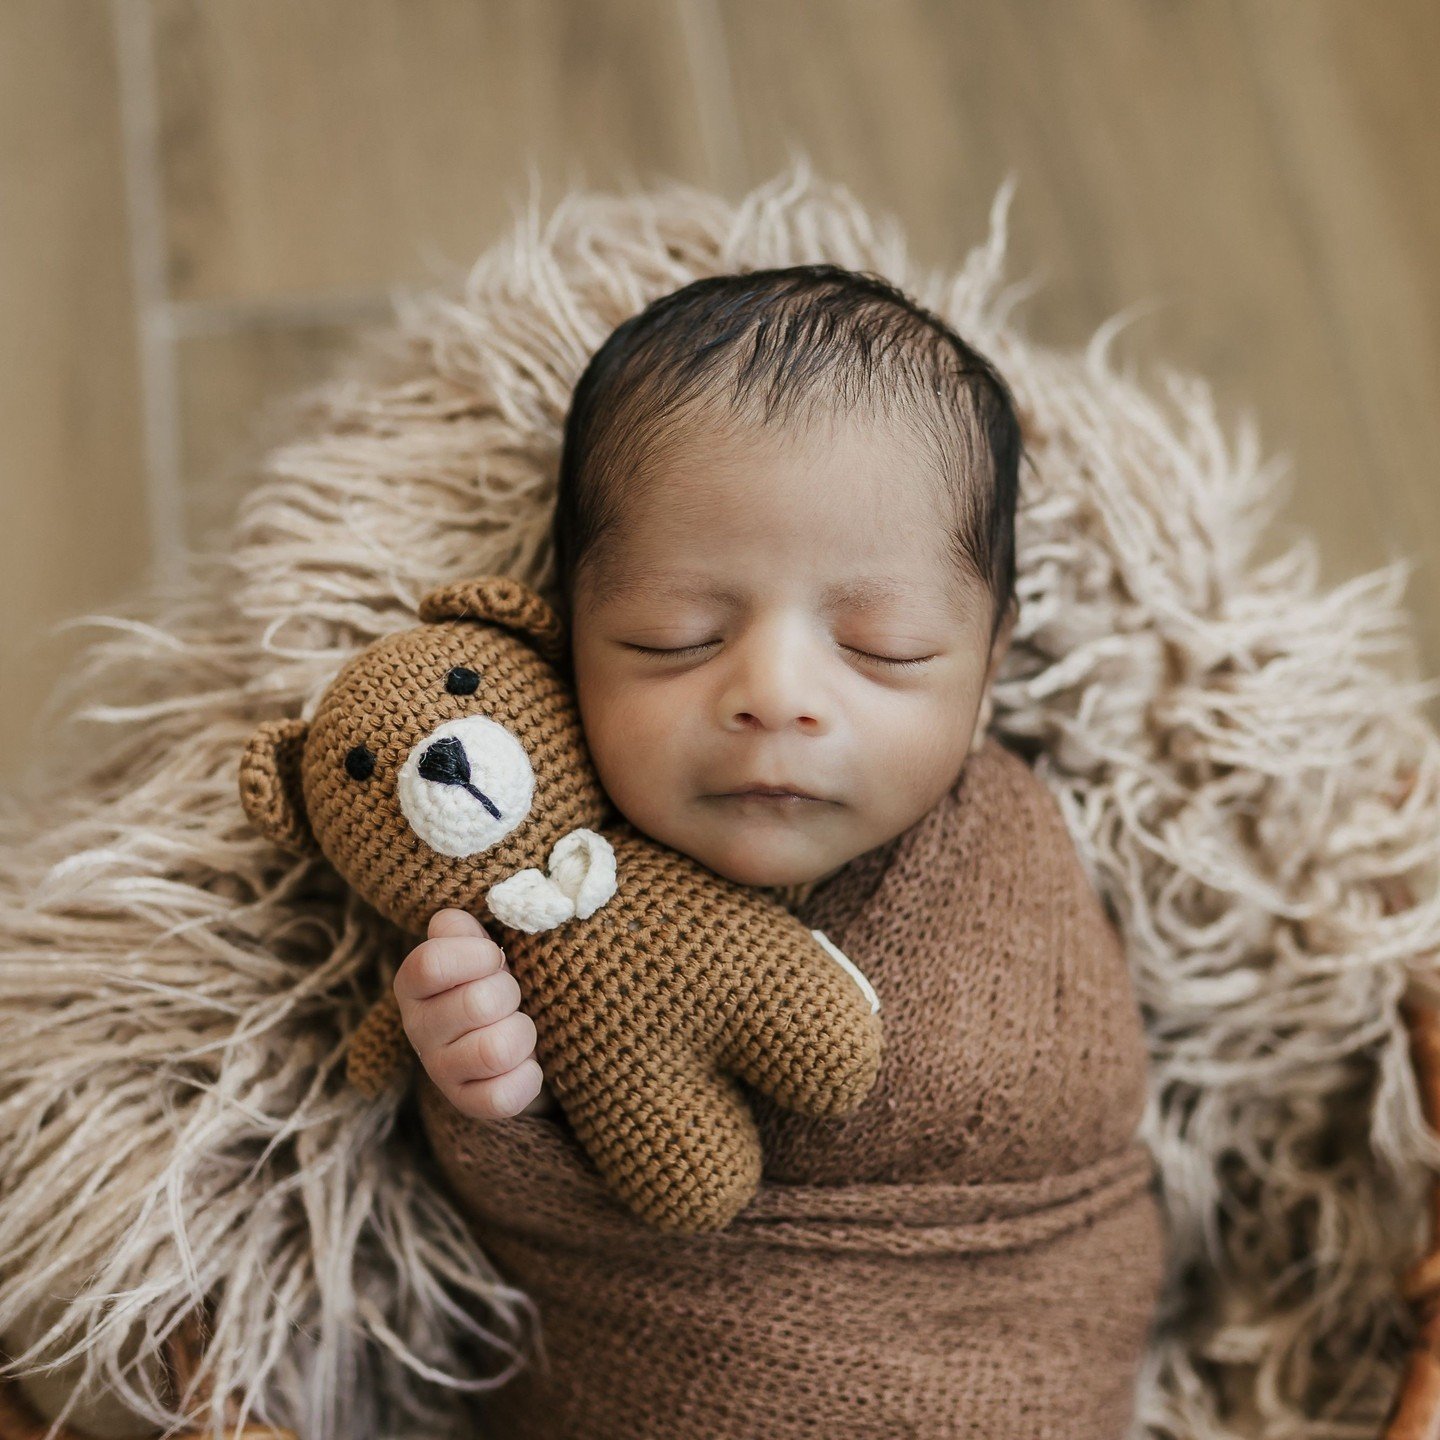 Wrapped in love, welcoming this little man to the world 💙👶🧸 ⁠
.⁠
.⁠
.⁠
.⁠
.⁠
.⁠
.⁠
#NewbornPhotography #BabyBoy #BlessedWithABaby #TeddyBearLove #TinyMiracles #NewbornShoot #BabyLove #NewbornSession #BundleOfJoy #NewbornLife #BabyPhotography #Welc